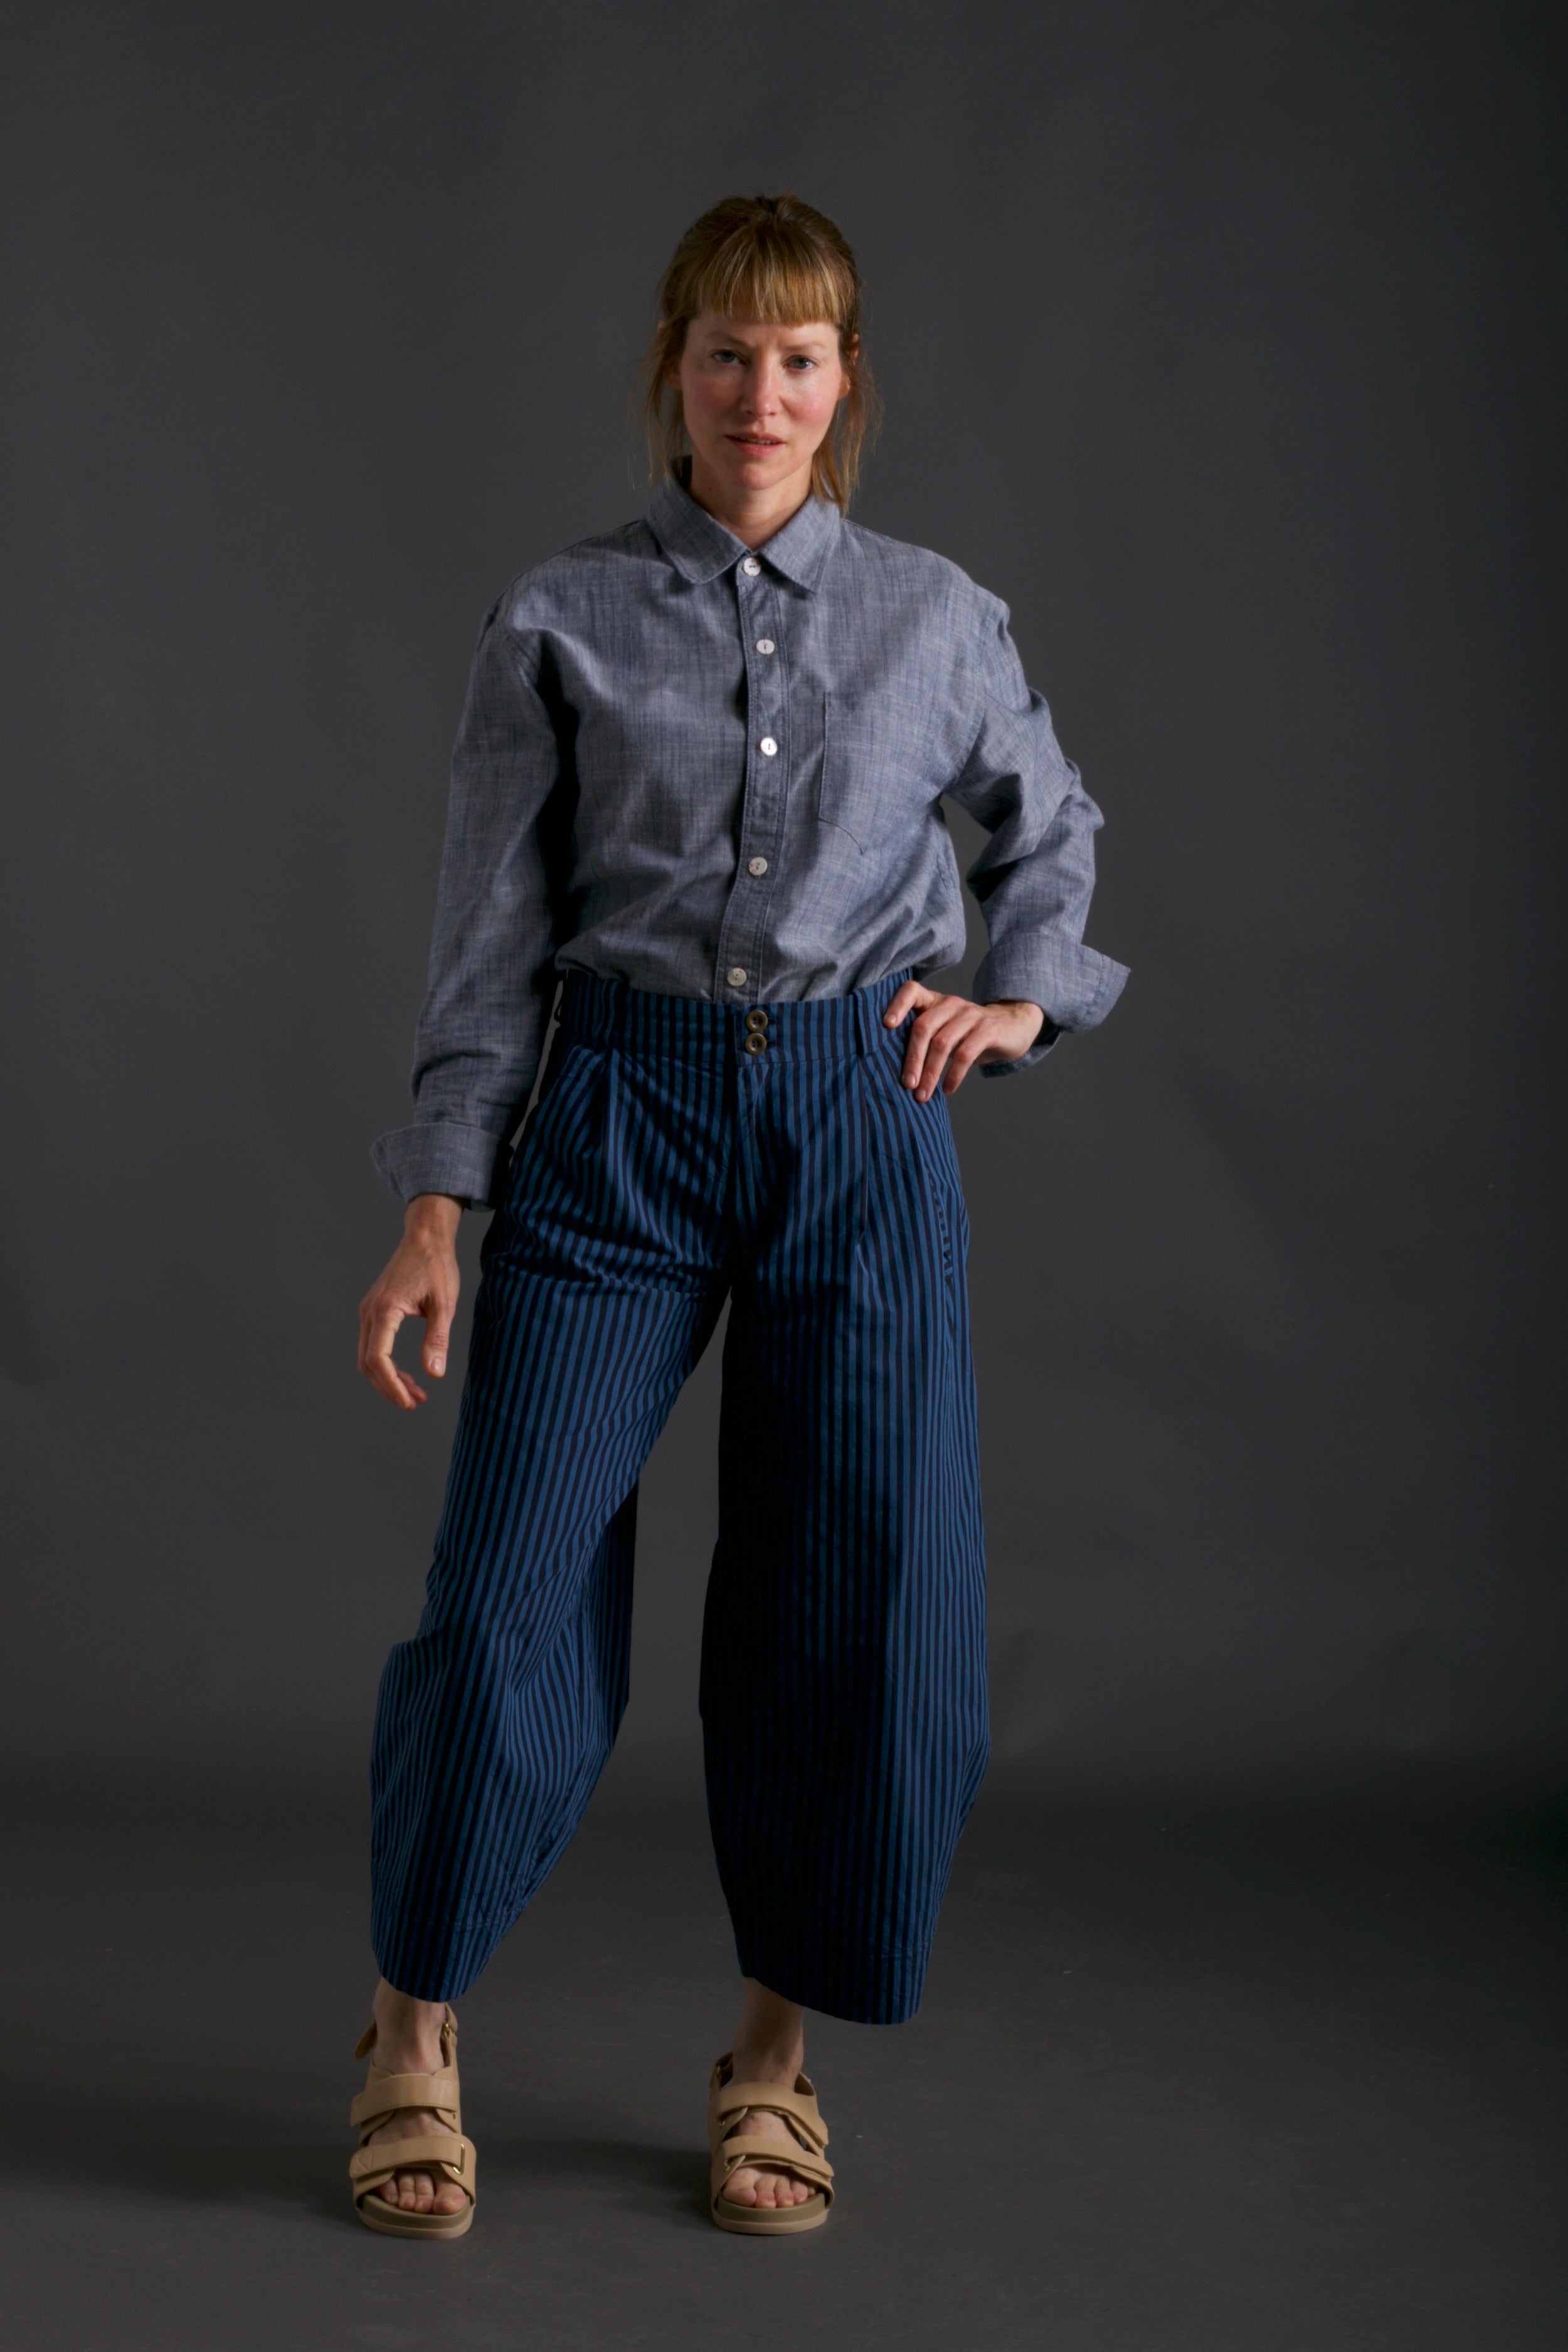 Sienna wears Striped Dutch Trouser with Chambray Shirt